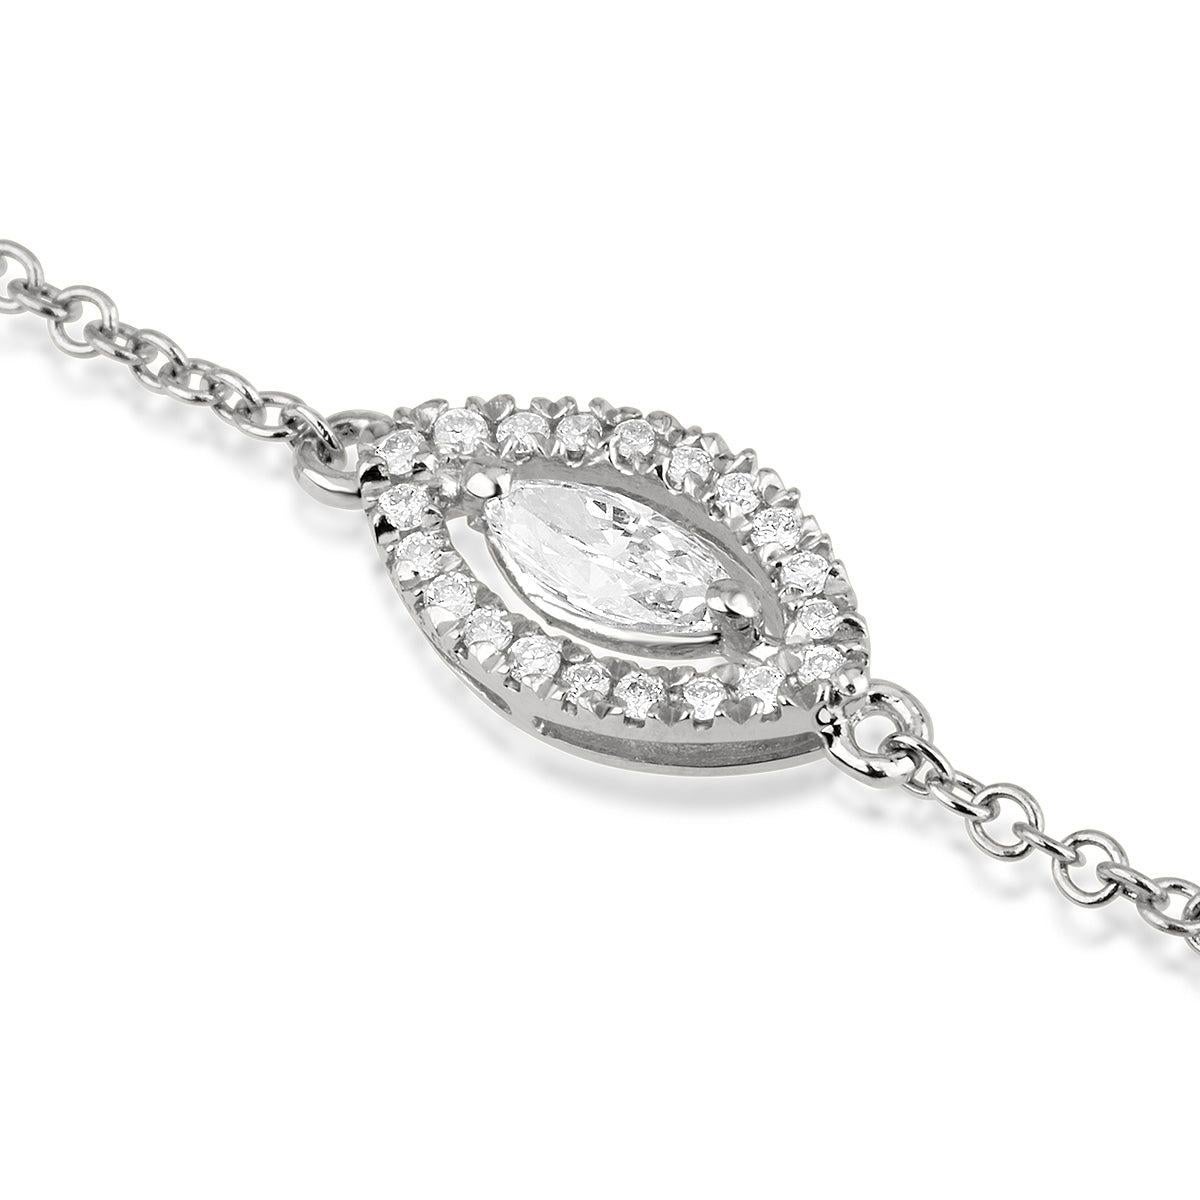 0.16 Carat Marquise and Round Diamond Eye Pendant Bracelet in 14K White Gold

Captivating in design, this dainty eye-shaped pendant bracelet is a true beauty. Designed in 14k white gold, and set with a 0.10 carat marquise-cut center diamond